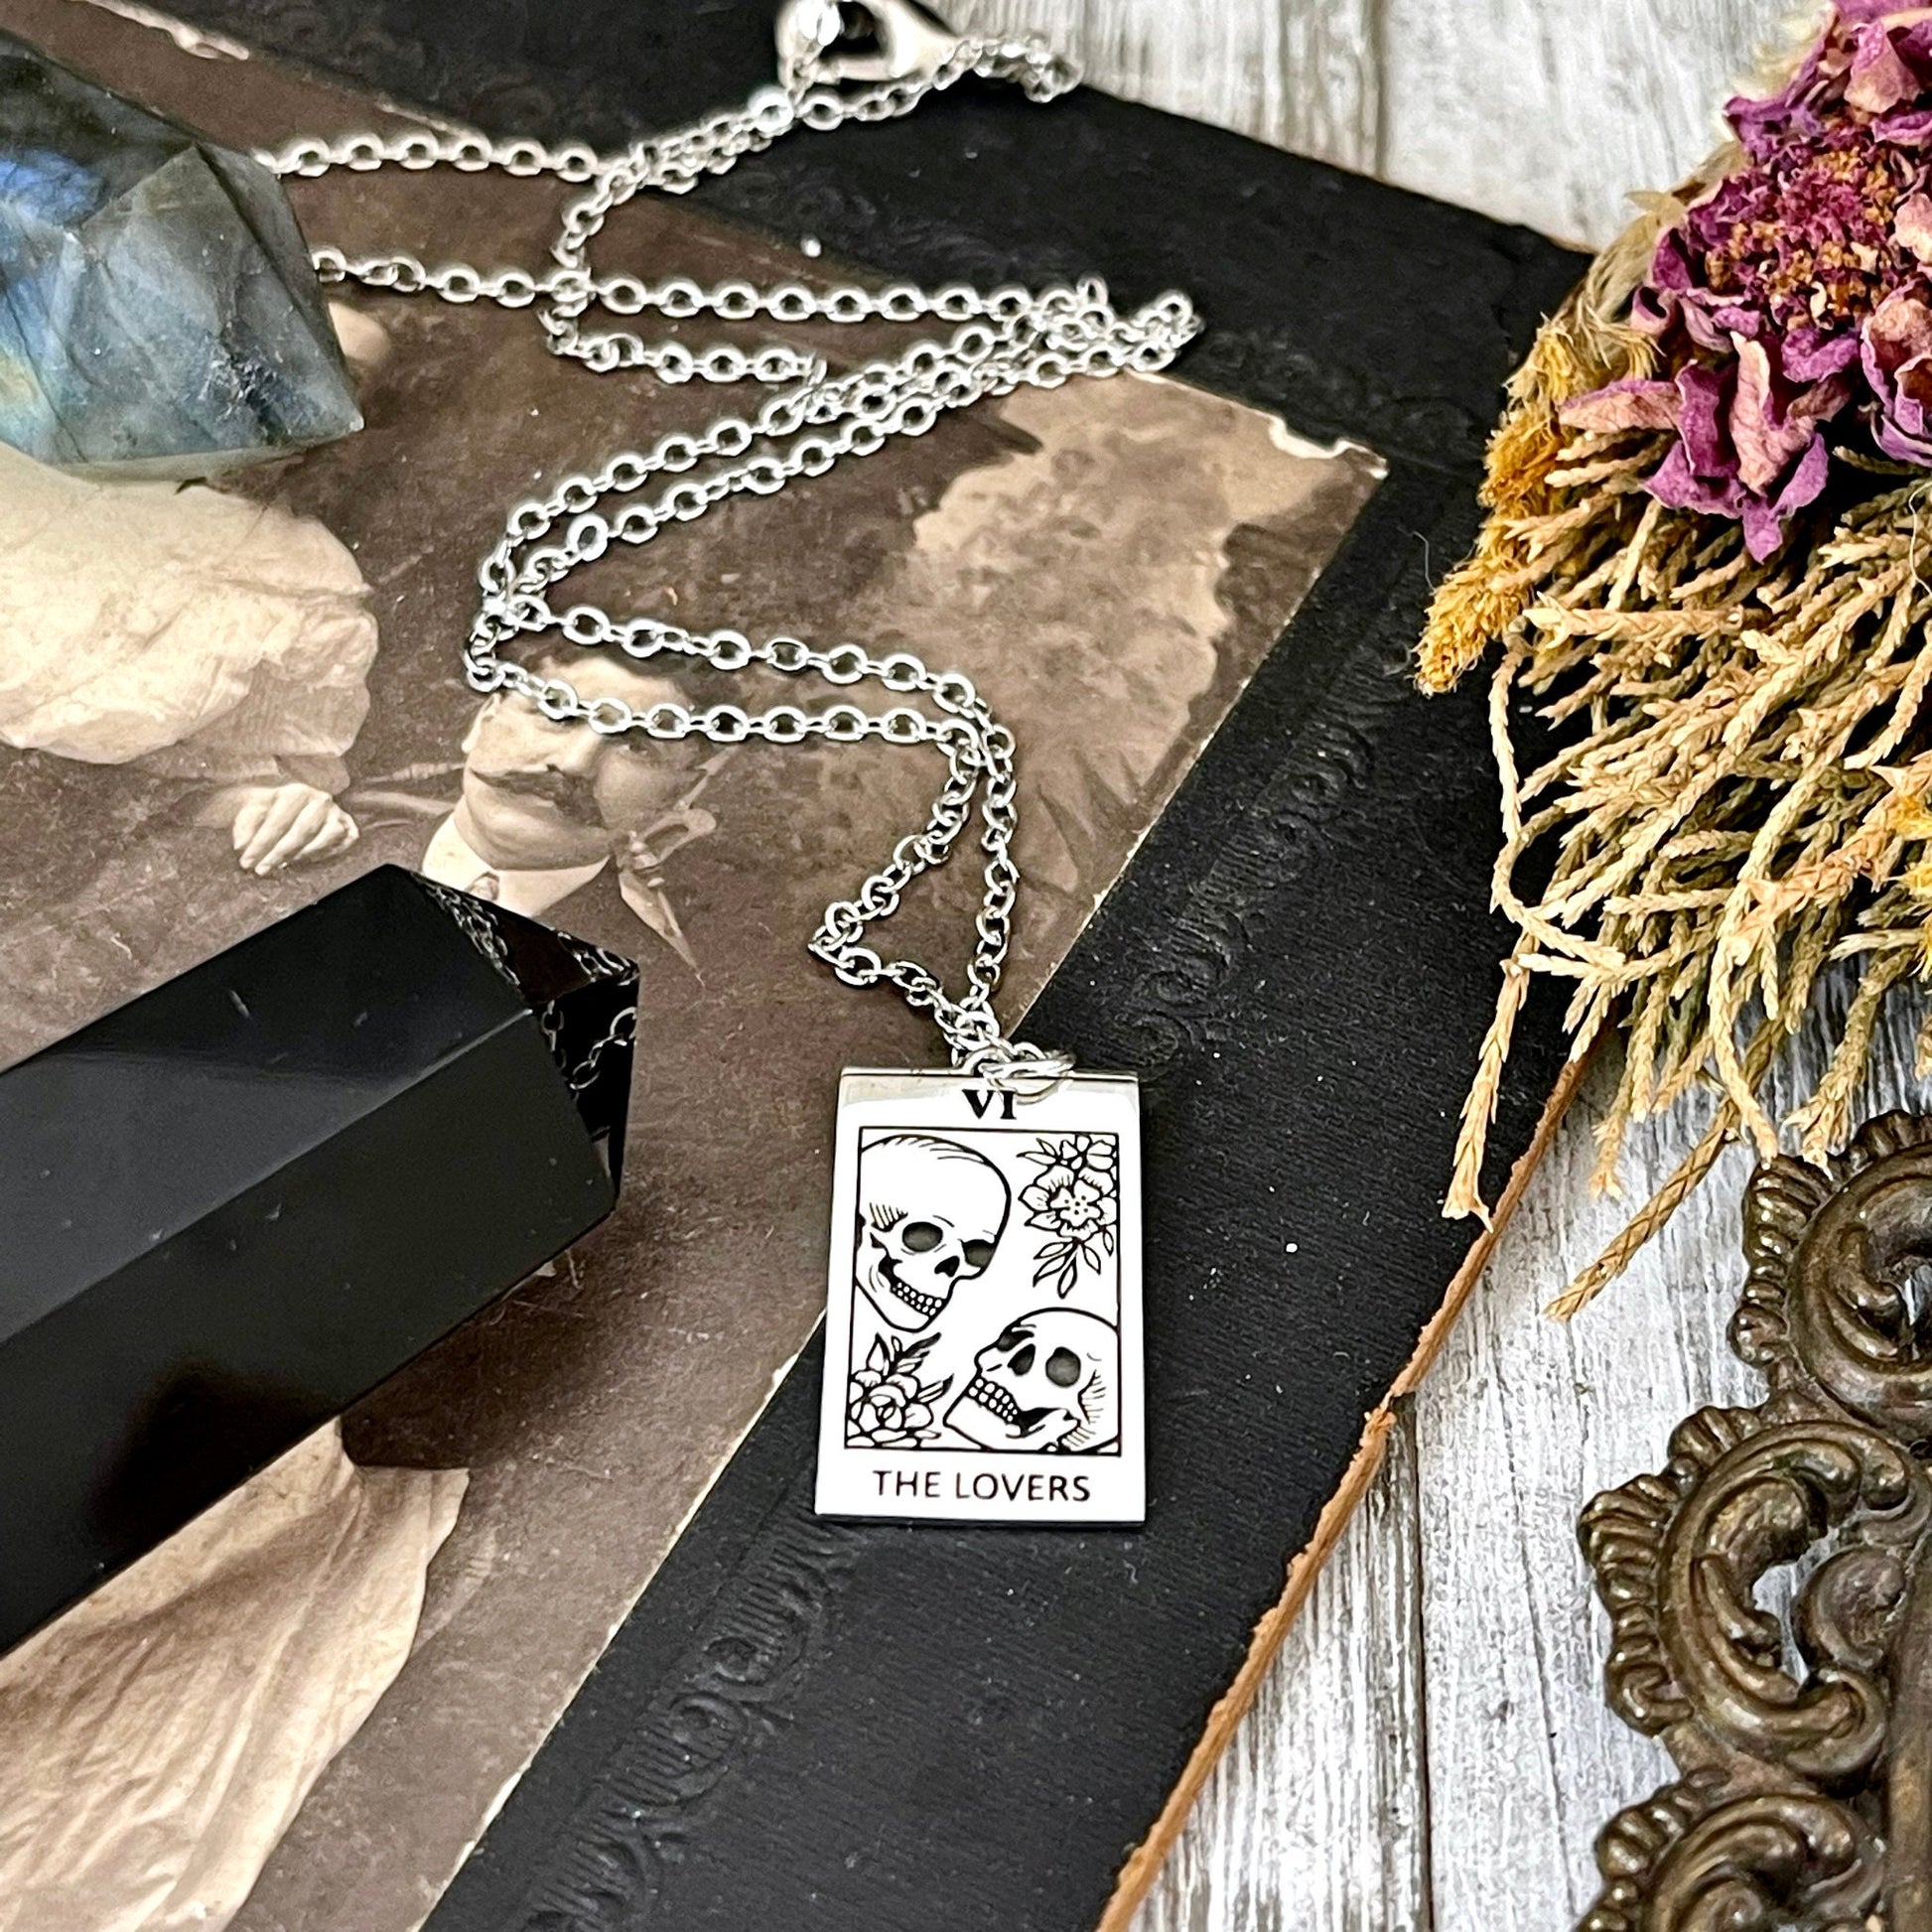 925 Sterling Silver, Etsy ID: 1403597695, Foxlark Alchemy, Gift for Woman, Gothic Jewelry, Jewelry, Necklace Pendant, Necklaces, Pendants, Skull Necklace, Skull Necklace Charm, Talisman Necklace, Tarot Card Necklace, The Lovers, TINY TALISMANS, Witch Jewe